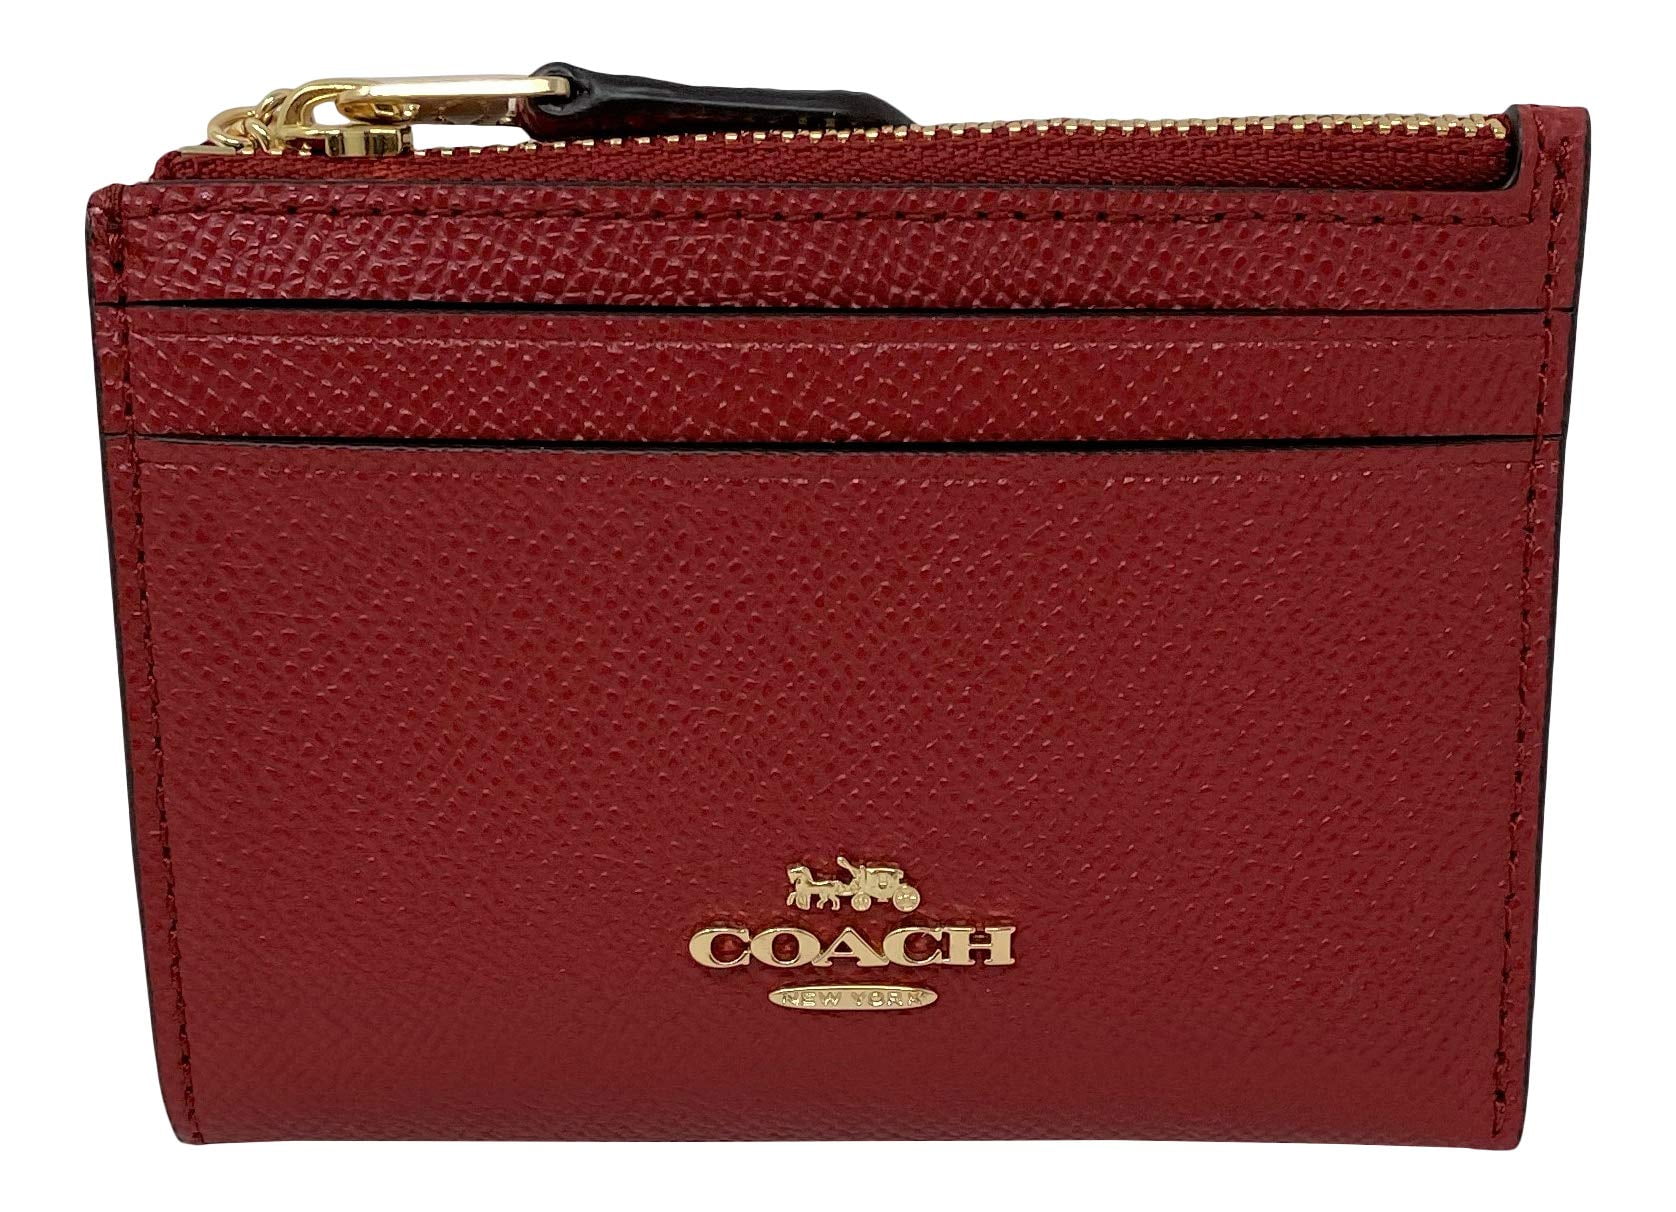 Red Leather Bag Deals Under $100 | COACH® Outlet